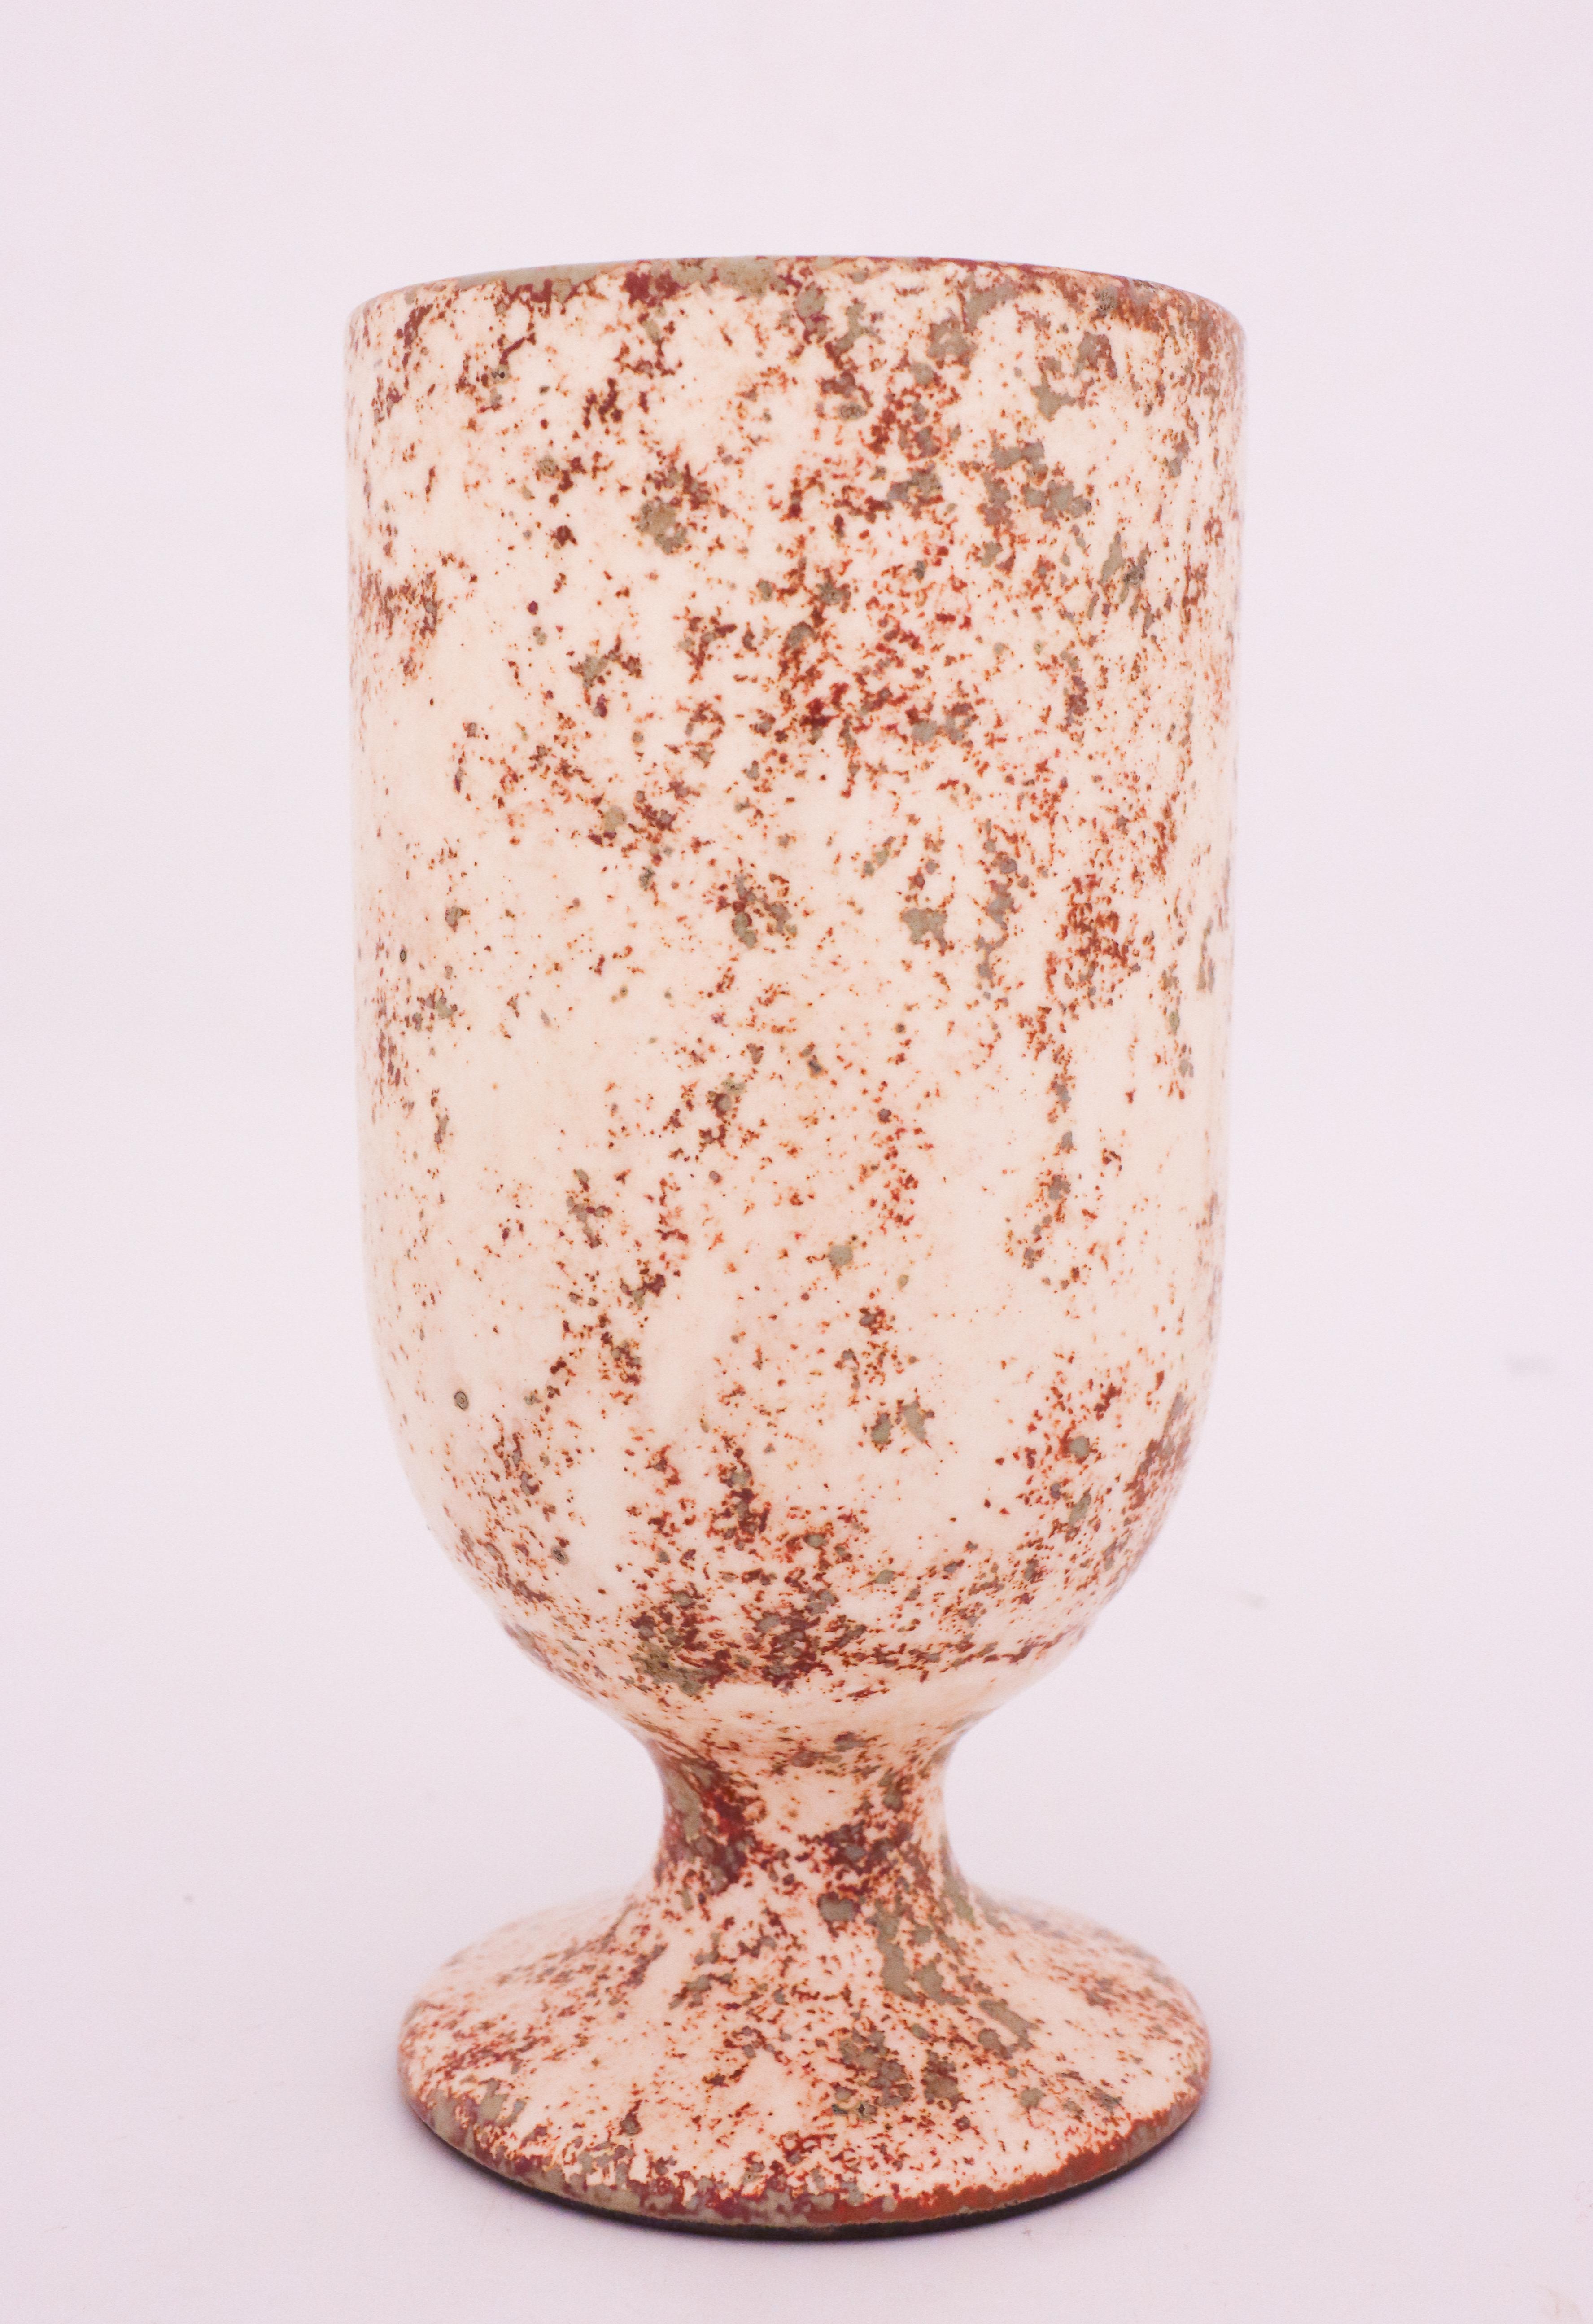 A white speckled vase designed by Hans Hedberg in his studio in Biot. The vase is 28 cm high and in very good condition. 

Hans Hedberg (1917-2007) Swedish ceramist who had his studio in Biot, near Nice in France.
Hedberg worked with several